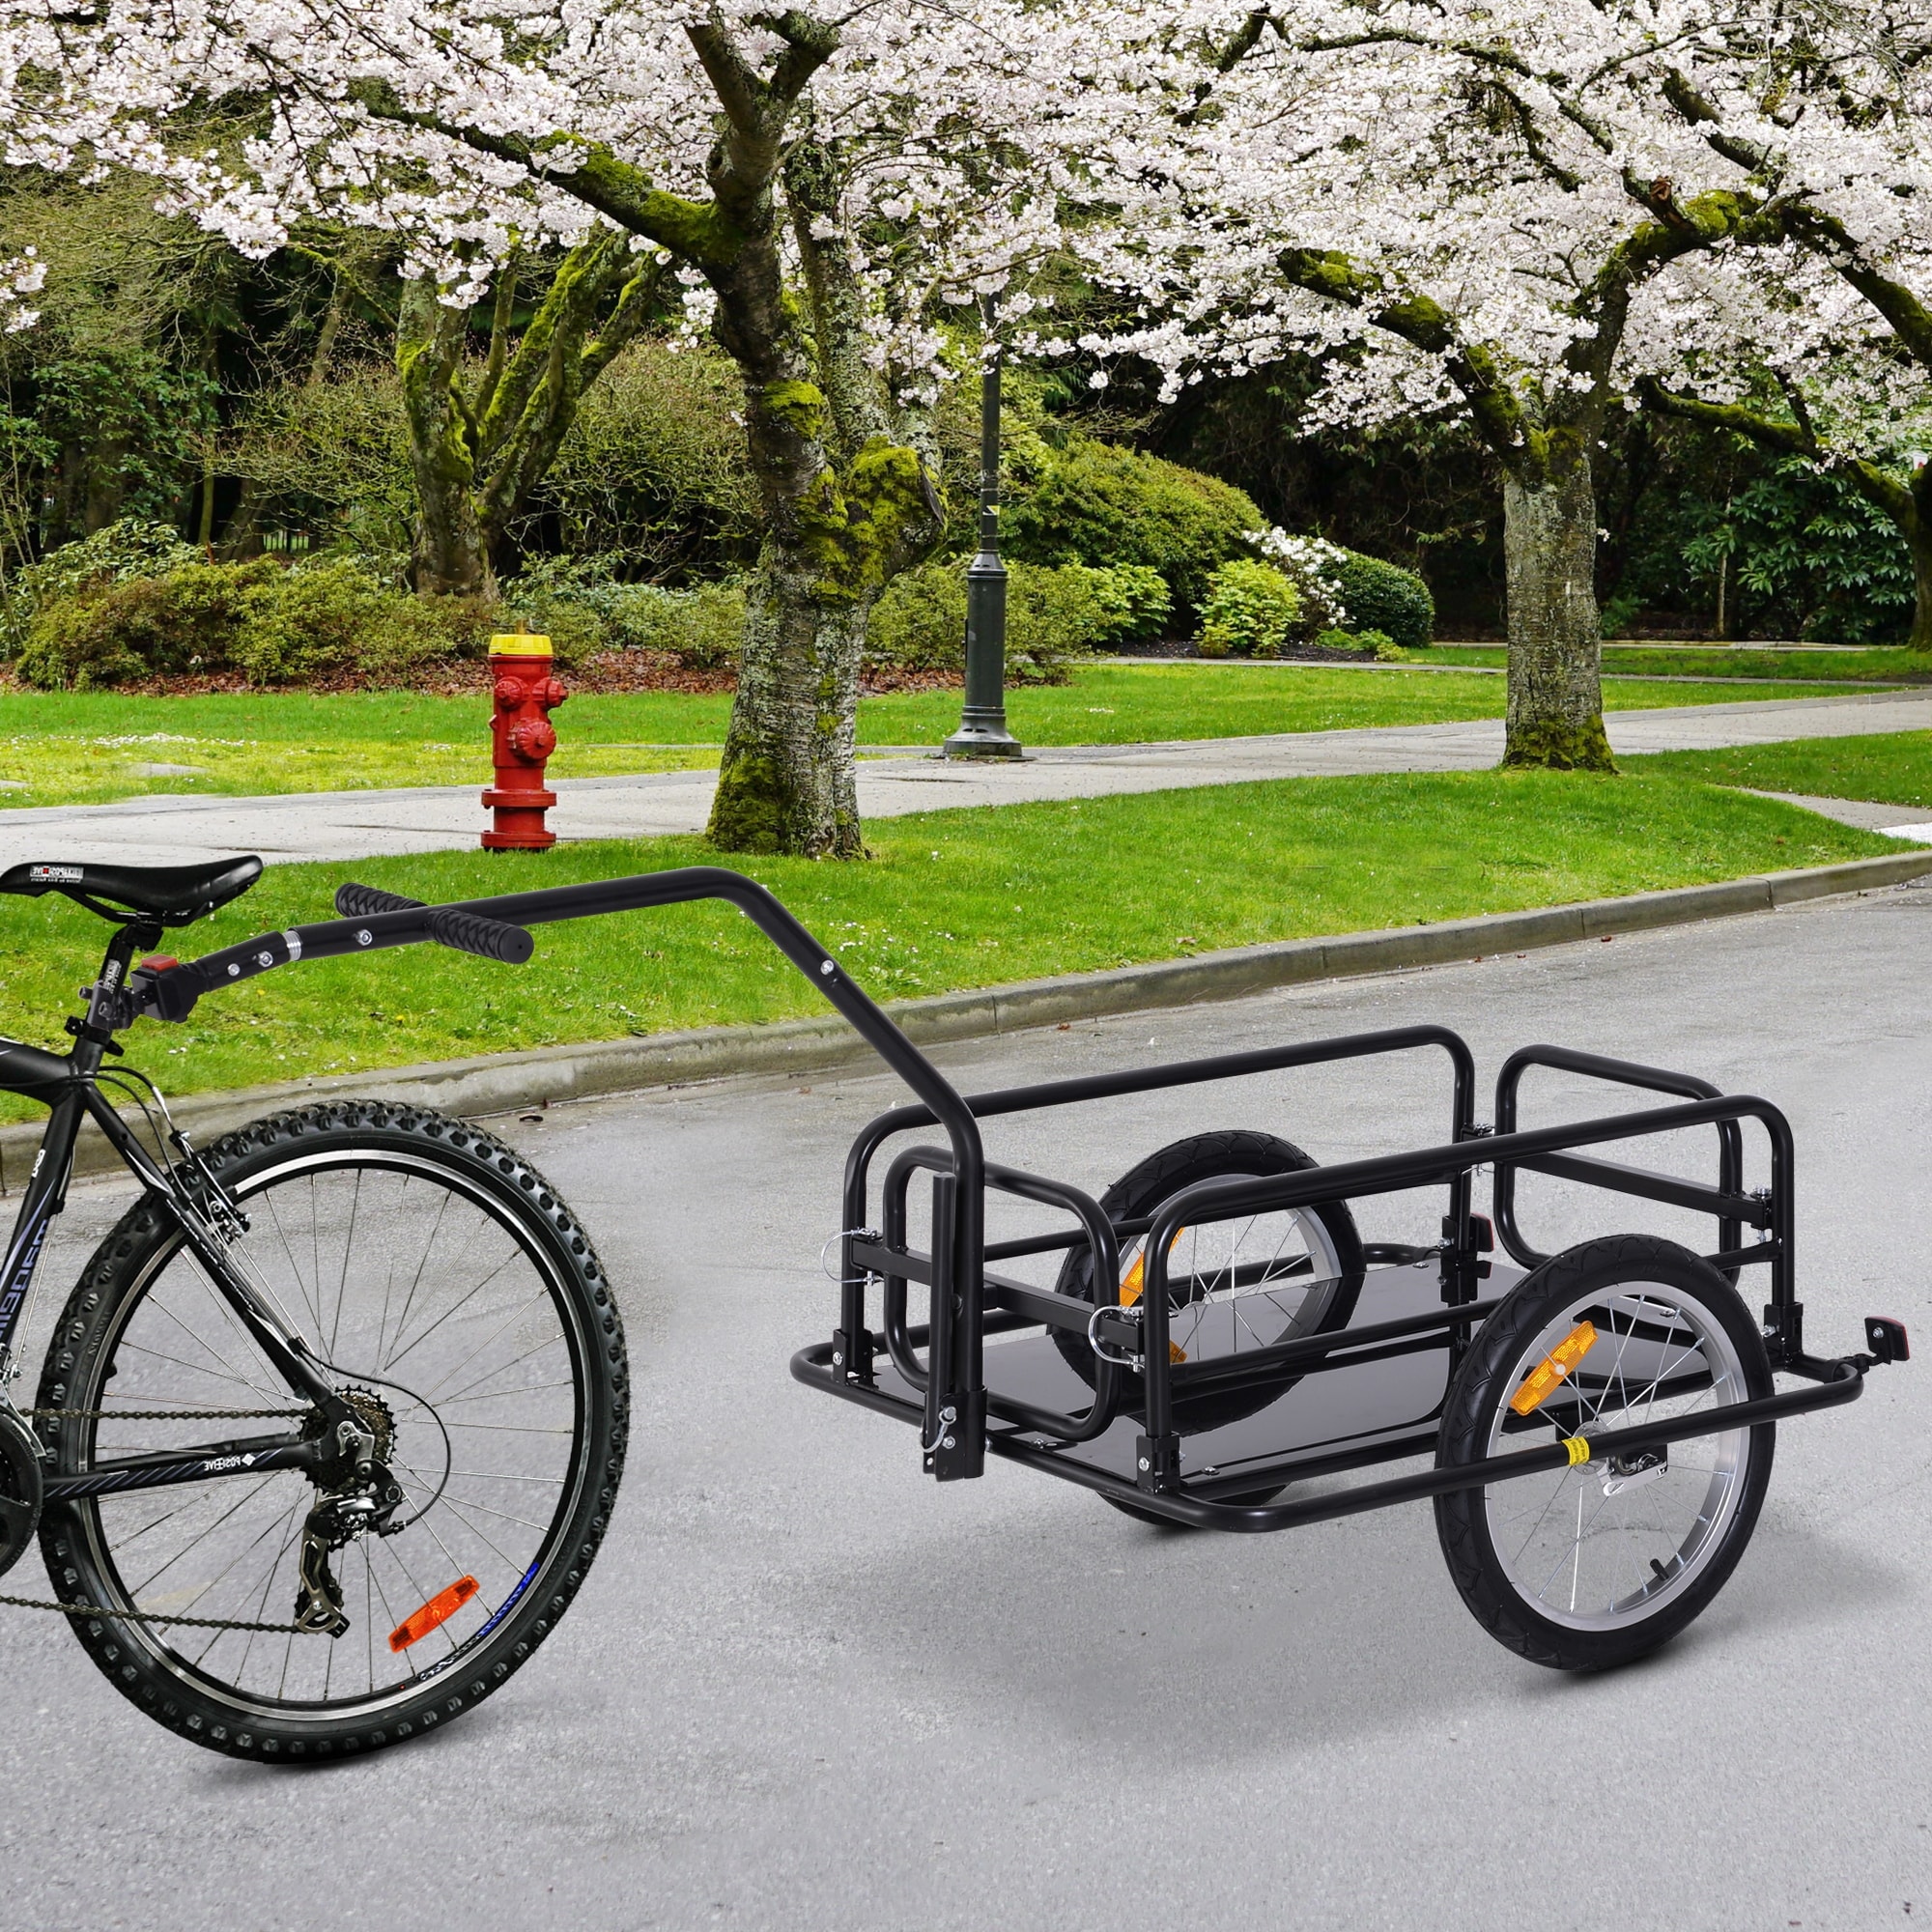 https://ak1.ostkcdn.com/images/products/is/images/direct/d8fef0554c91ab077dc019742e1828c3e3a95677/Aosom-Folding-Bike-Cargo-Trailer-Cart-with-Seat-Post-Hitch.jpg